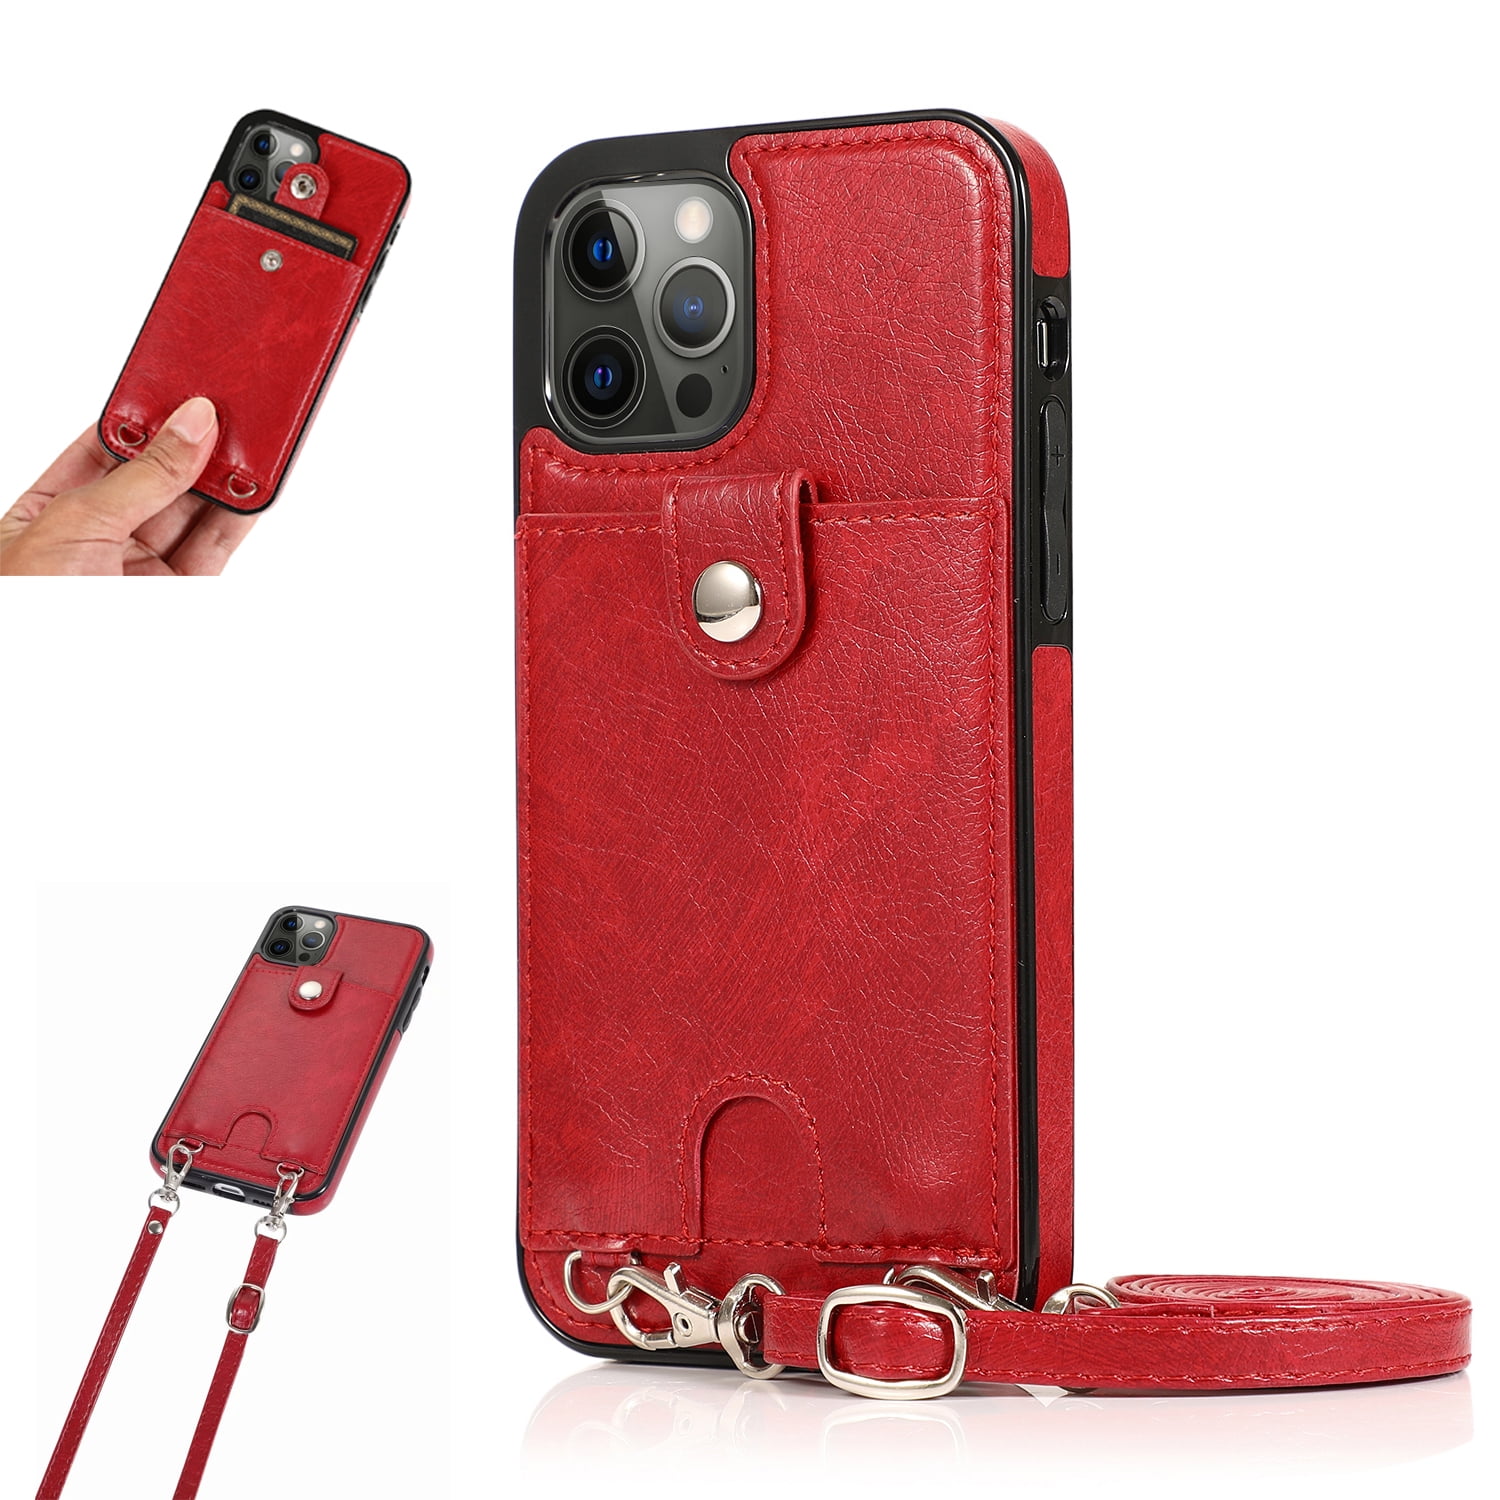 Adjustable Shoulder Strap Card Can be Placed Can be Used as a Mobile Phone Holder PU Leather Phone Lanyard Strap Case Holder Crossbody Case for iPhone 12/13/Pro